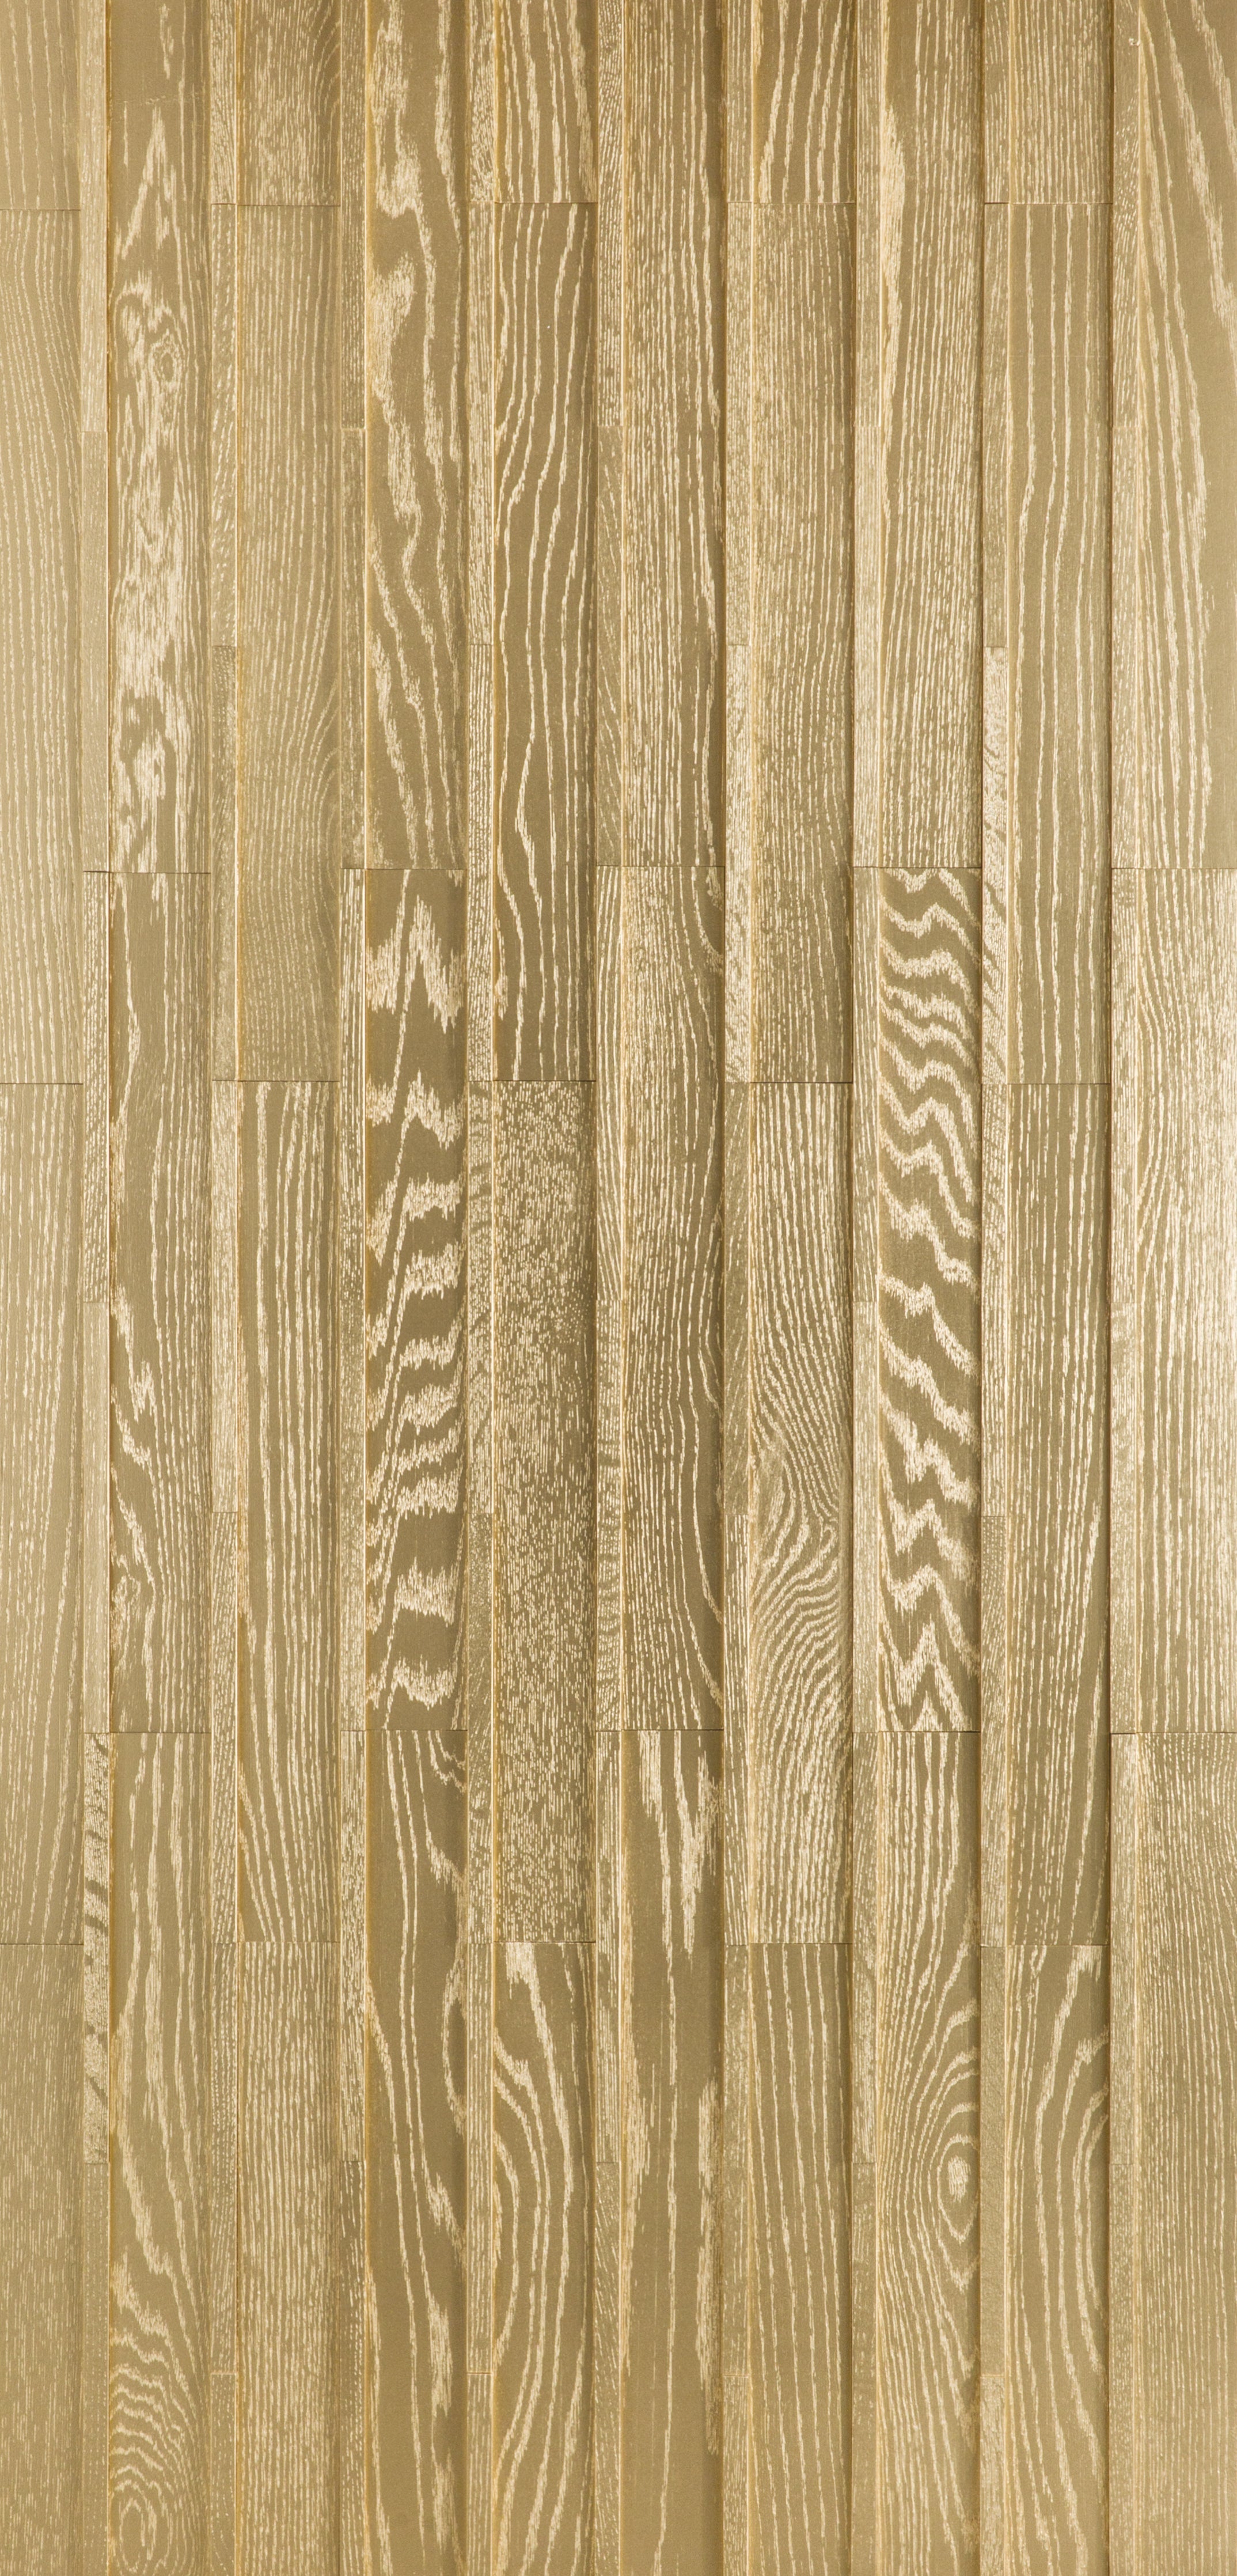 duchateau inceptiv kubik gold oak three dimensional wall natural wood panel lacquer for interior use distributed by surface group international